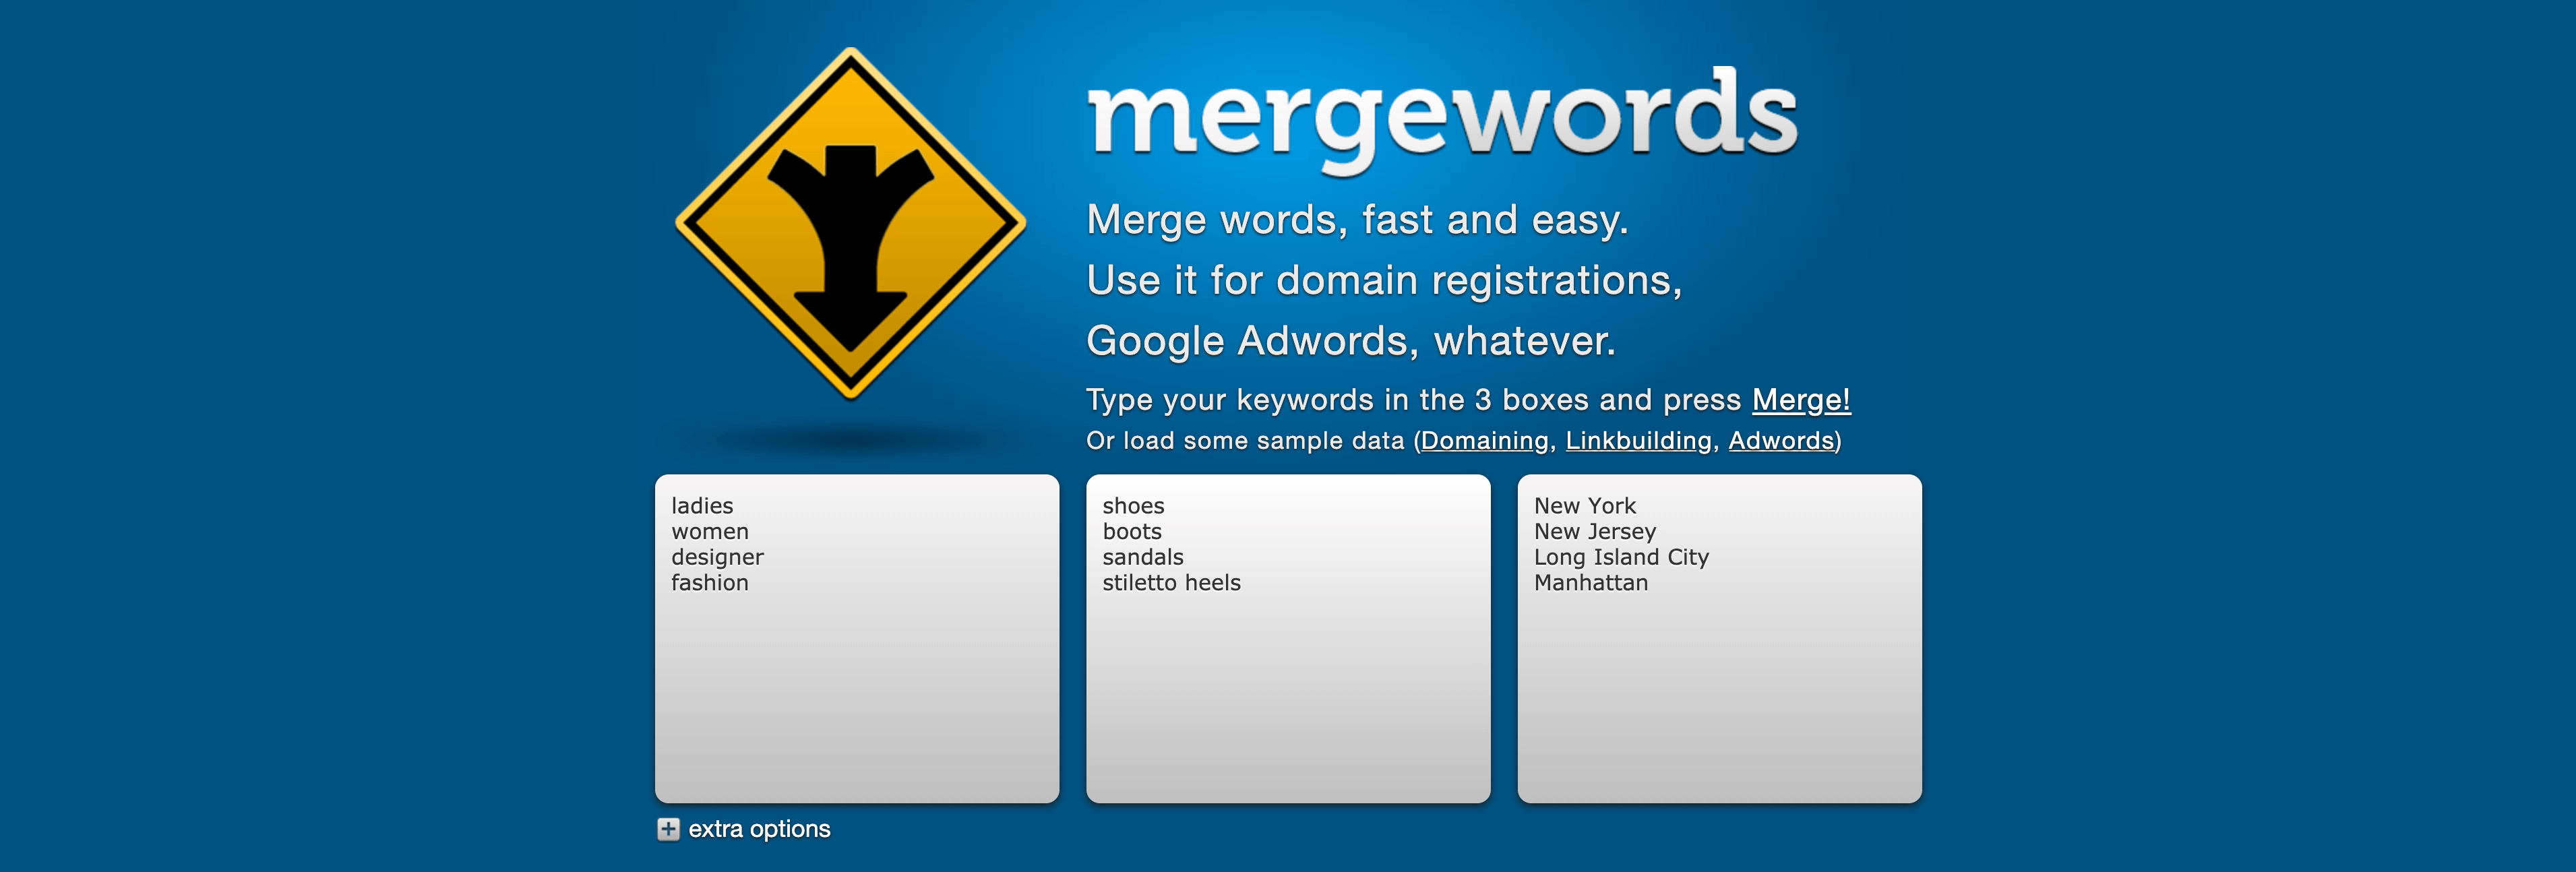 Using mergewords to expand your list with potential keywords